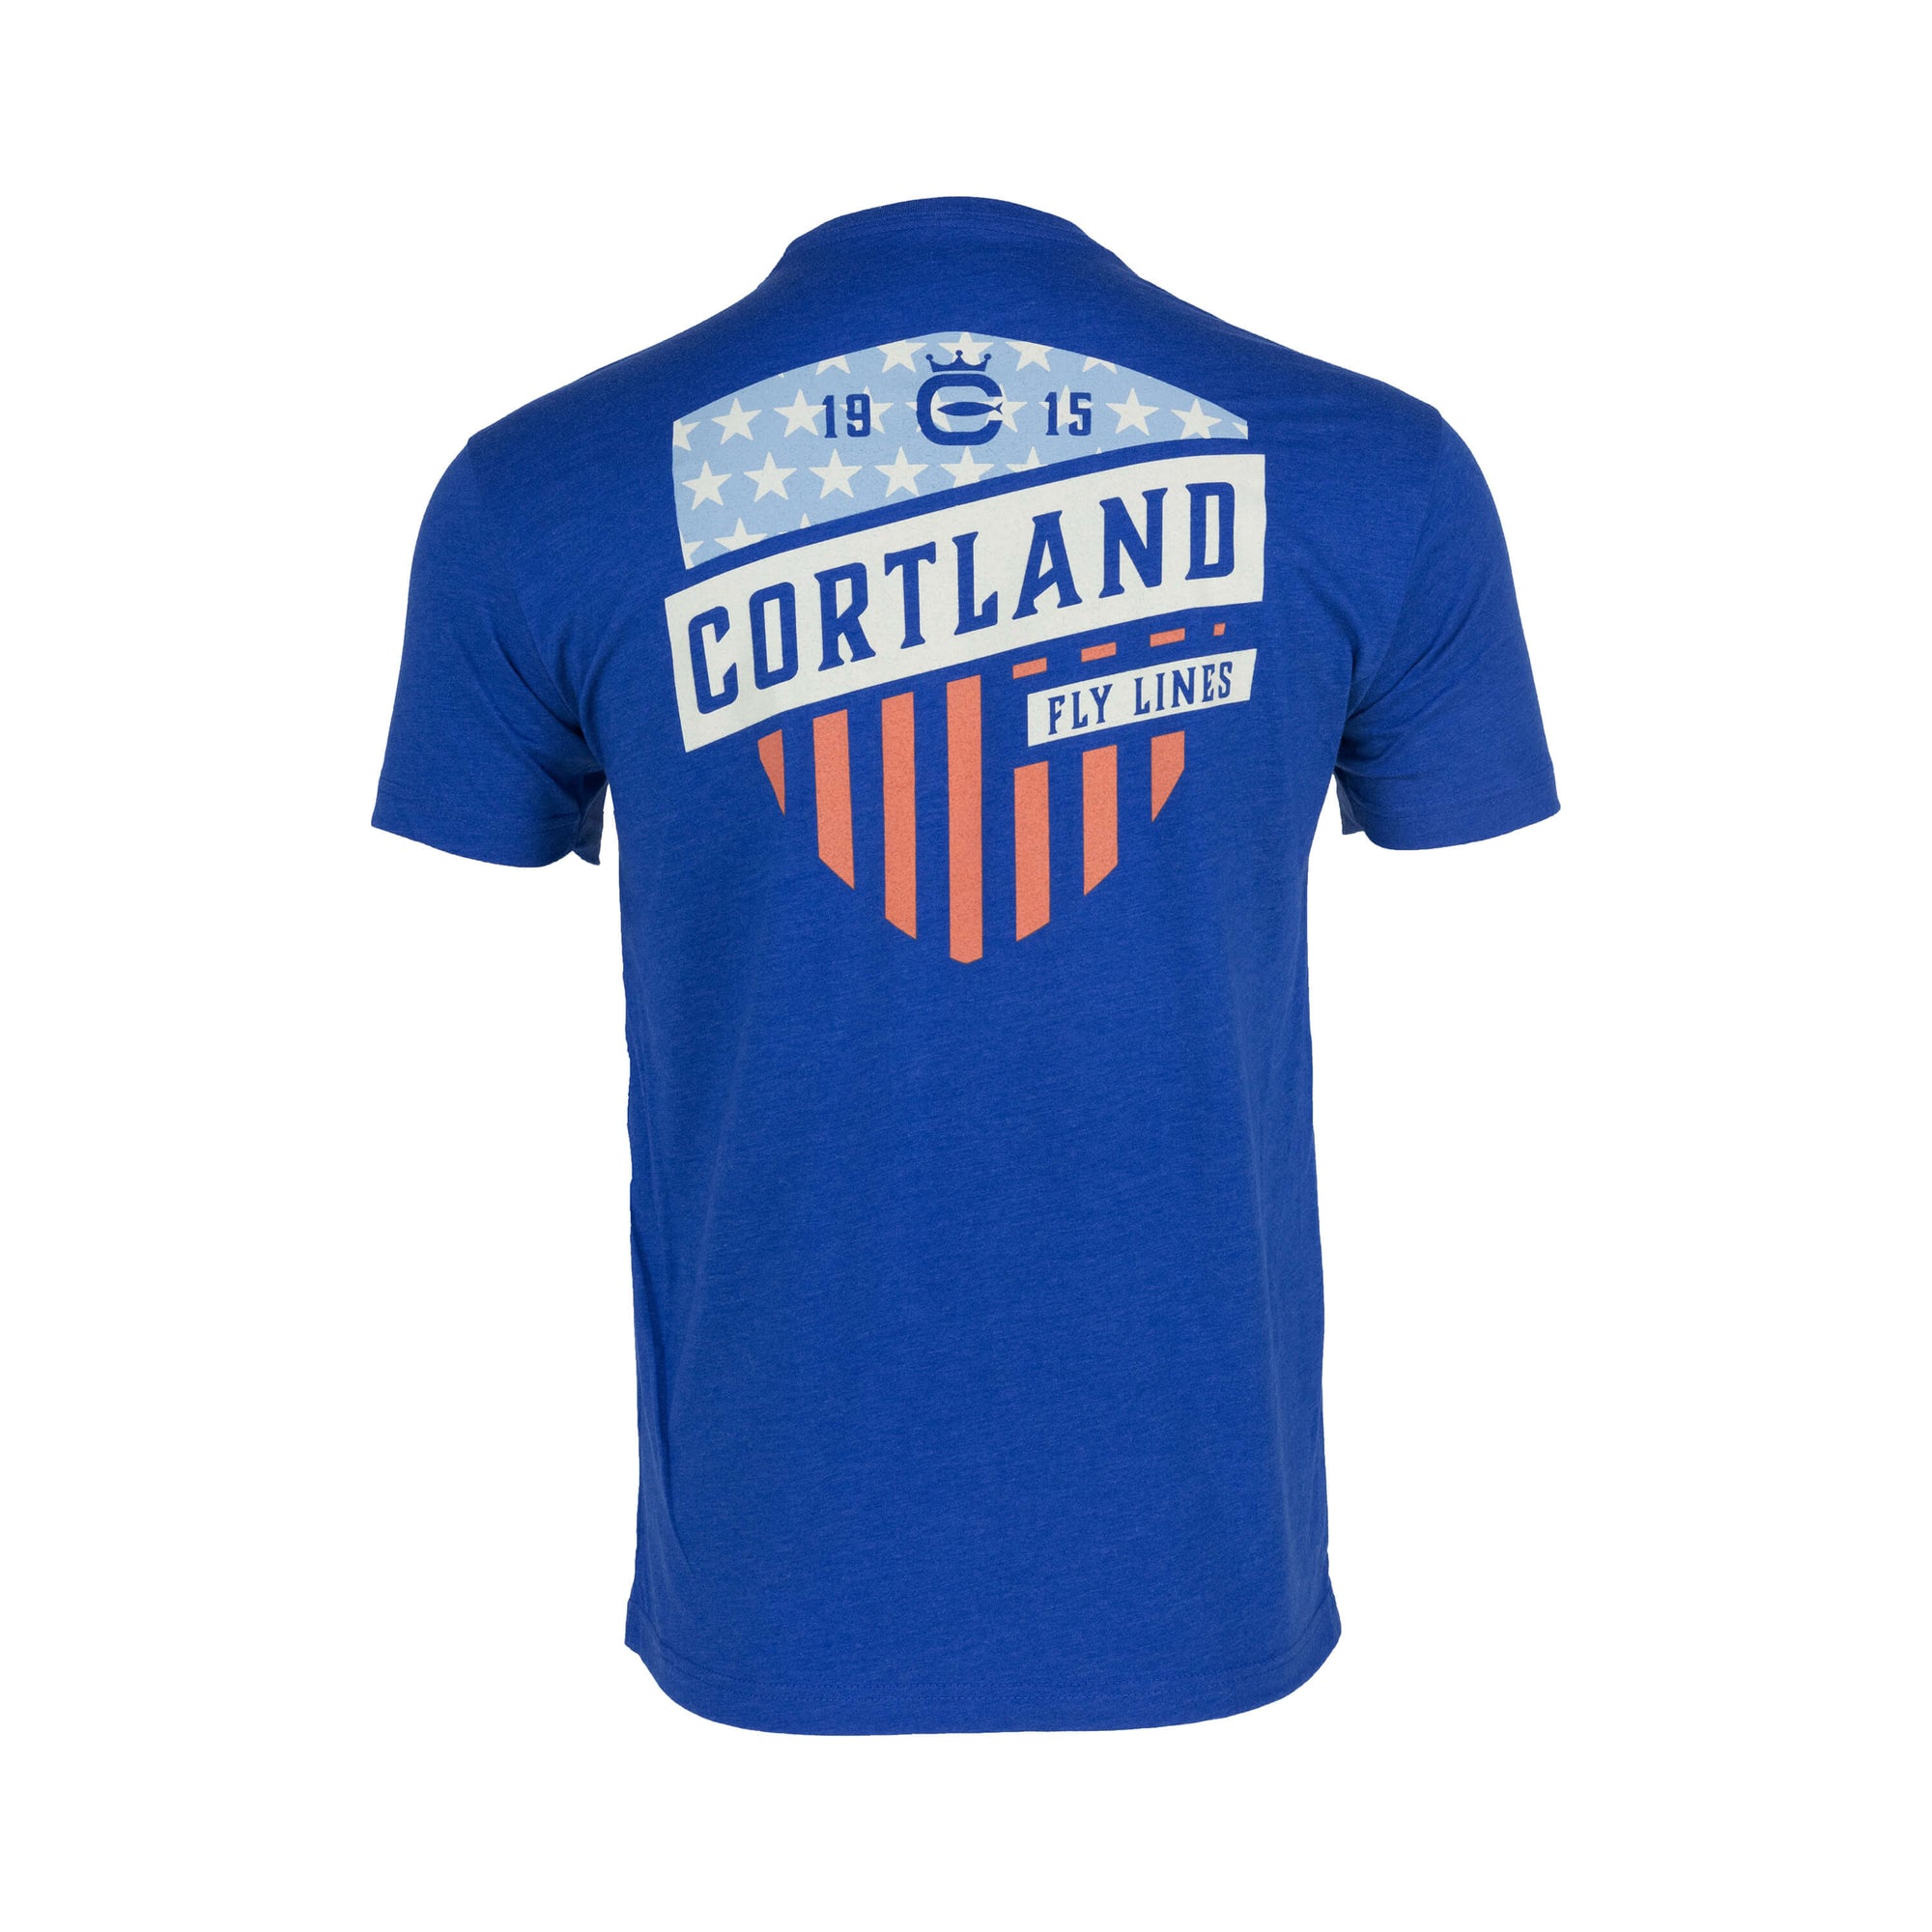 Back view of Cortland Topographic Logo T-Shirt